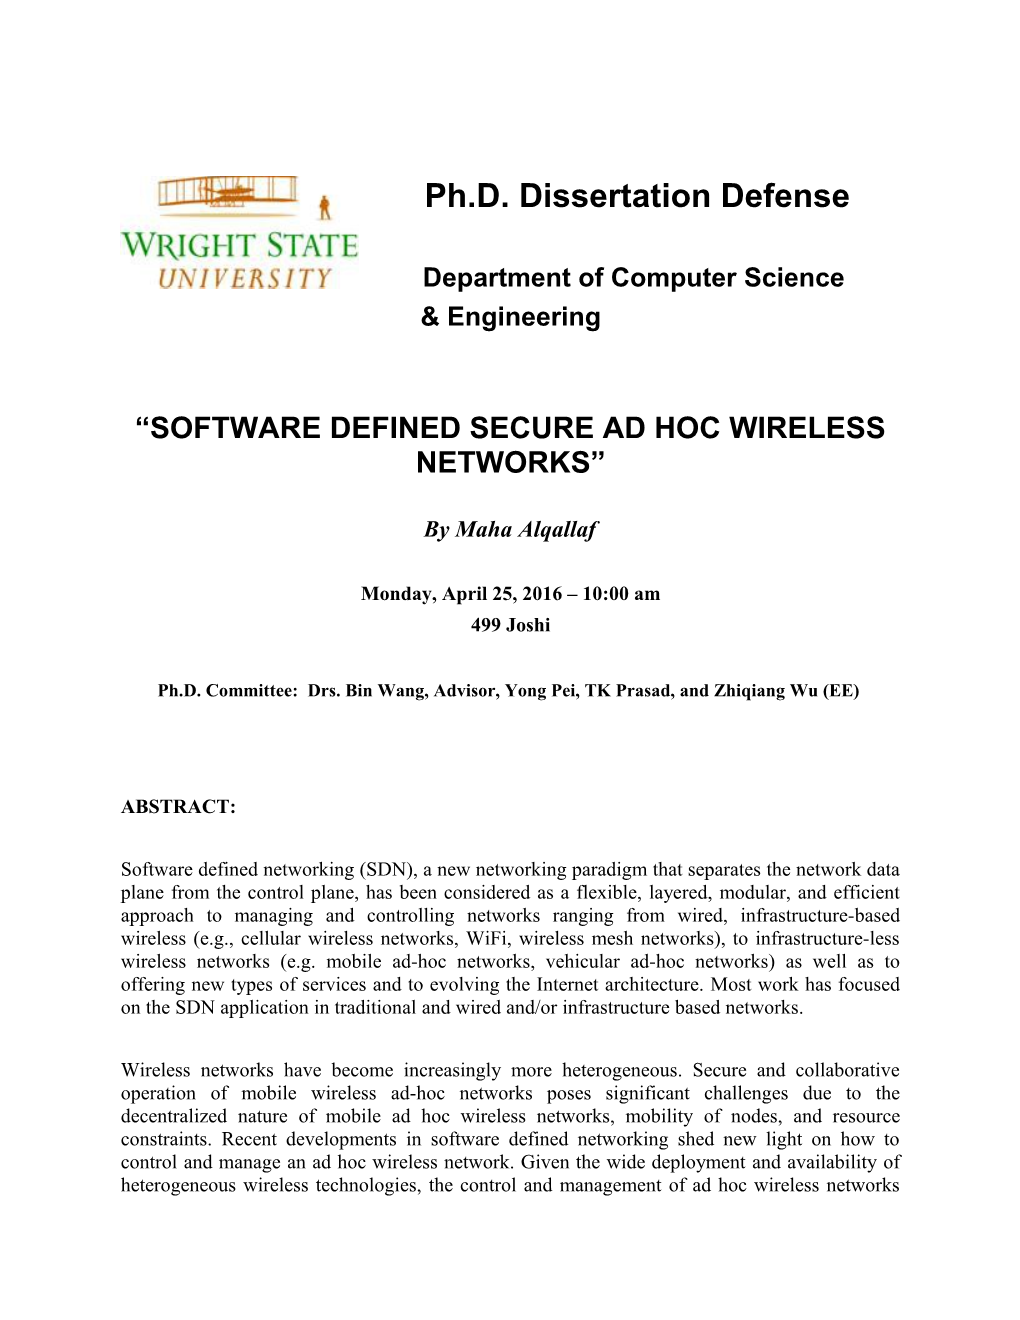 Software Defined Secure Ad Hoc Wireless Networks